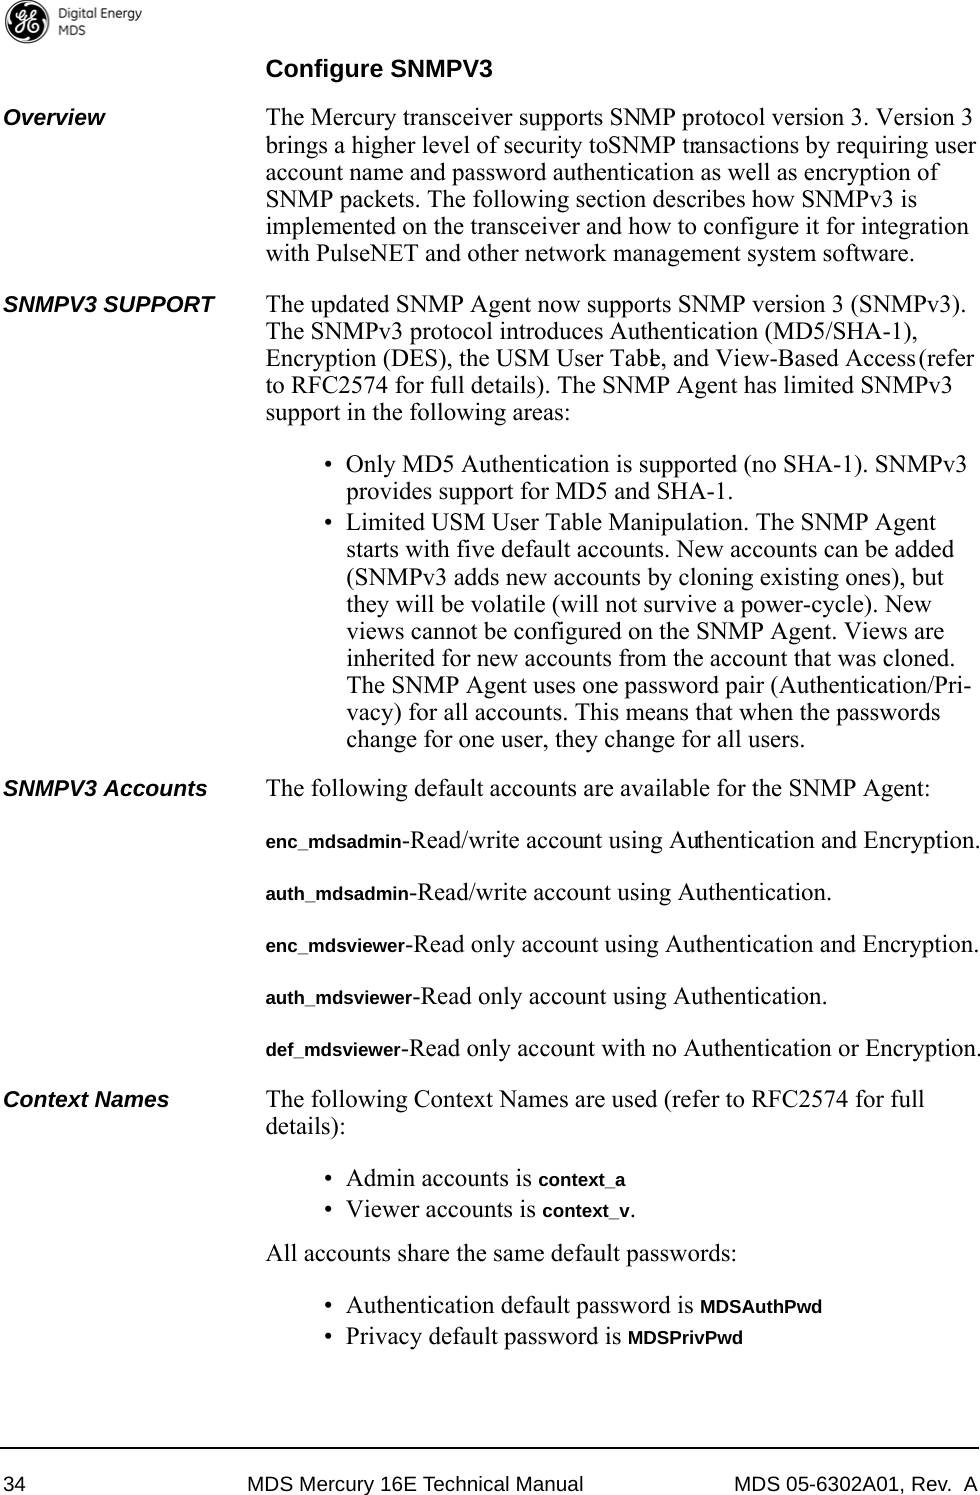 34 MDS Mercury 16E Technical Manual MDS 05-6302A01, Rev.  AConfigure SNMPV3Overview The Mercury transceiver supports SNMP protocol version 3. Version 3 brings a higher level of security to SNMP transactions by requiring user account name and password authentication as well as encryption of SNMP packets. The following section describes how SNMPv3 is implemented on the transceiver and how to configure it for integration with PulseNET and other network management system software.SNMPV3 SUPPORT The updated SNMP Agent now supports SNMP version 3 (SNMPv3). The SNMPv3 protocol introduces Authentication (MD5/SHA-1), Encryption (DES), the USM User Table, and View-Based Access (refer to RFC2574 for full details). The SNMP Agent has limited SNMPv3 support in the following areas:• Only MD5 Authentication is supported (no SHA-1). SNMPv3 provides support for MD5 and SHA-1.• Limited USM User Table Manipulation. The SNMP Agent starts with five default accounts. New accounts can be added (SNMPv3 adds new accounts by cloning existing ones), but they will be volatile (will not survive a power-cycle). New views cannot be configured on the SNMP Agent. Views are inherited for new accounts from the account that was cloned. The SNMP Agent uses one password pair (Authentication/Pri-vacy) for all accounts. This means that when the passwords change for one user, they change for all users.SNMPV3 Accounts The following default accounts are available for the SNMP Agent:enc_mdsadmin-Read/write account using Authentication and Encryption.auth_mdsadmin-Read/write account using Authentication.enc_mdsviewer-Read only account using Authentication and Encryption.auth_mdsviewer-Read only account using Authentication.def_mdsviewer-Read only account with no Authentication or Encryption.Context Names The following Context Names are used (refer to RFC2574 for full details):• Admin accounts is context_a• Viewer accounts is context_v. All accounts share the same default passwords: • Authentication default password is MDSAuthPwd• Privacy default password is MDSPrivPwd